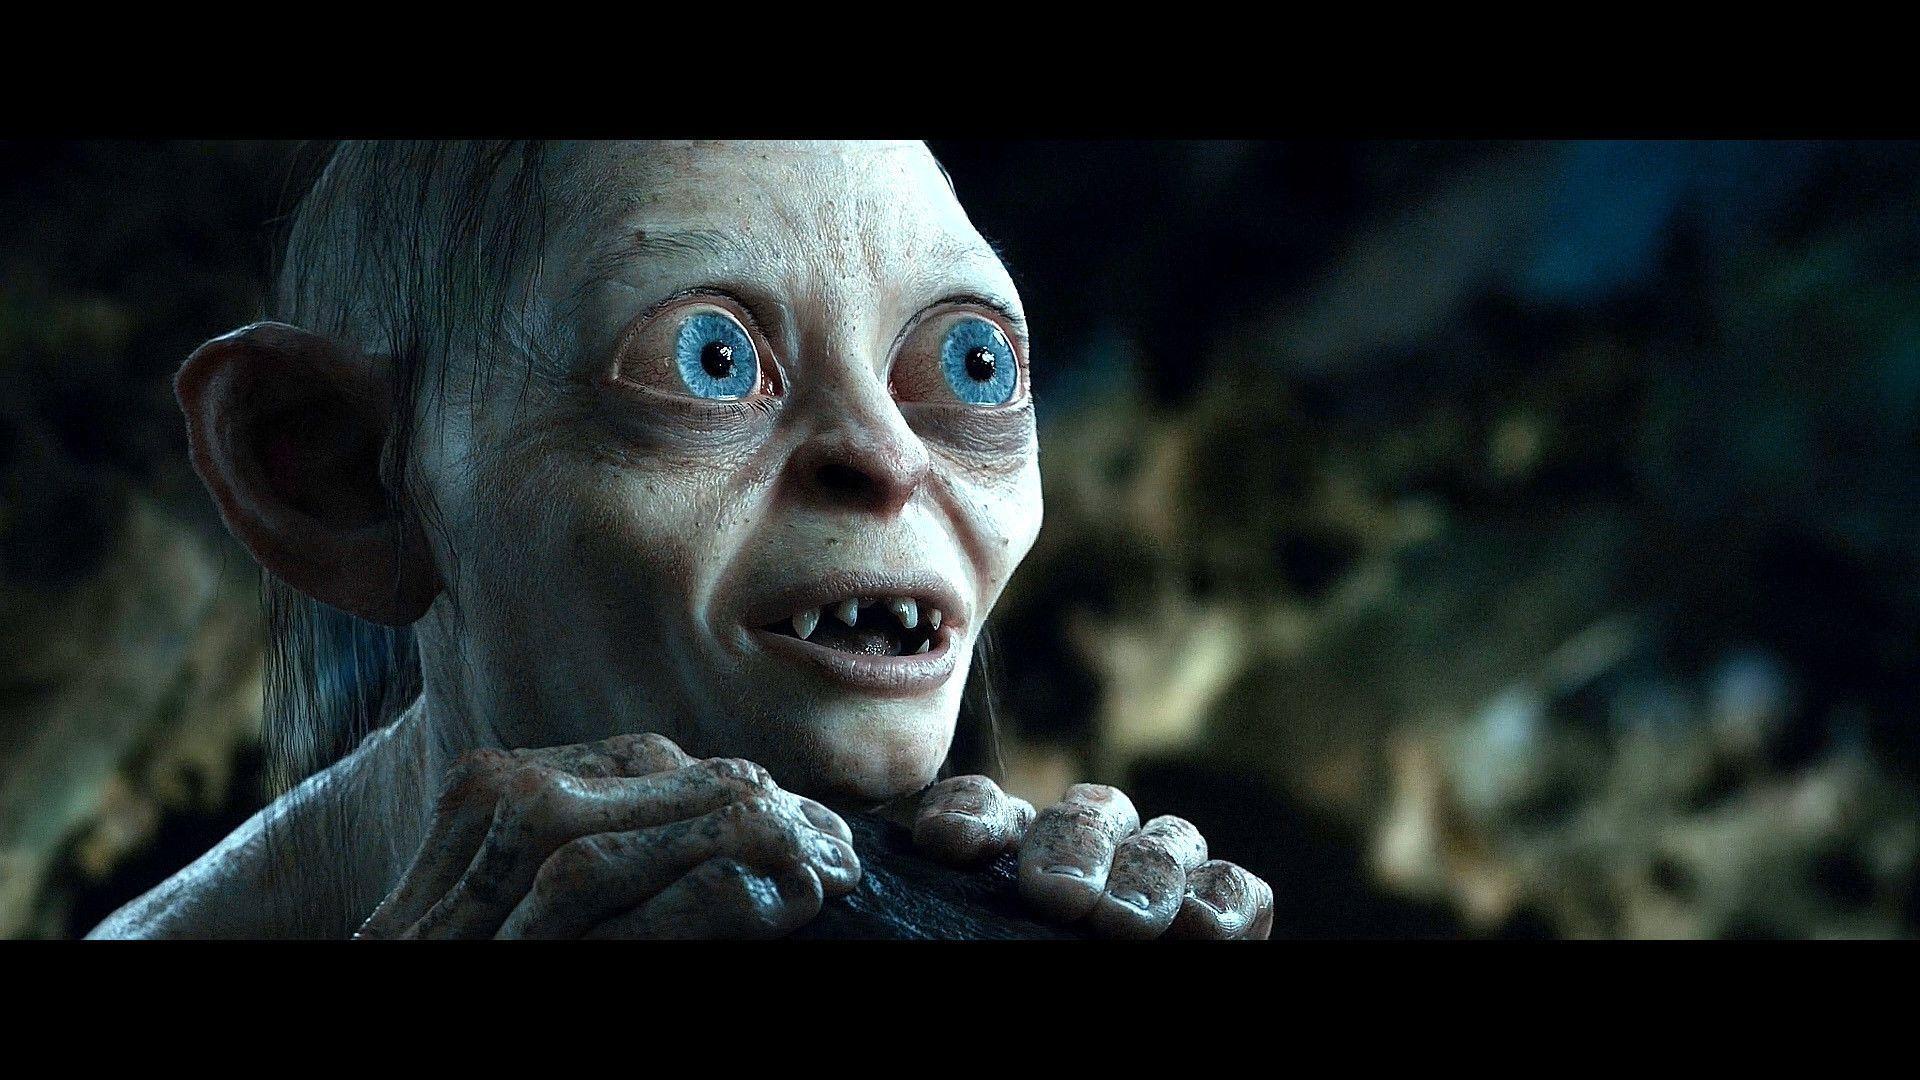 Gollum sings again: Sméagol performs a haunting rendition of "Mad